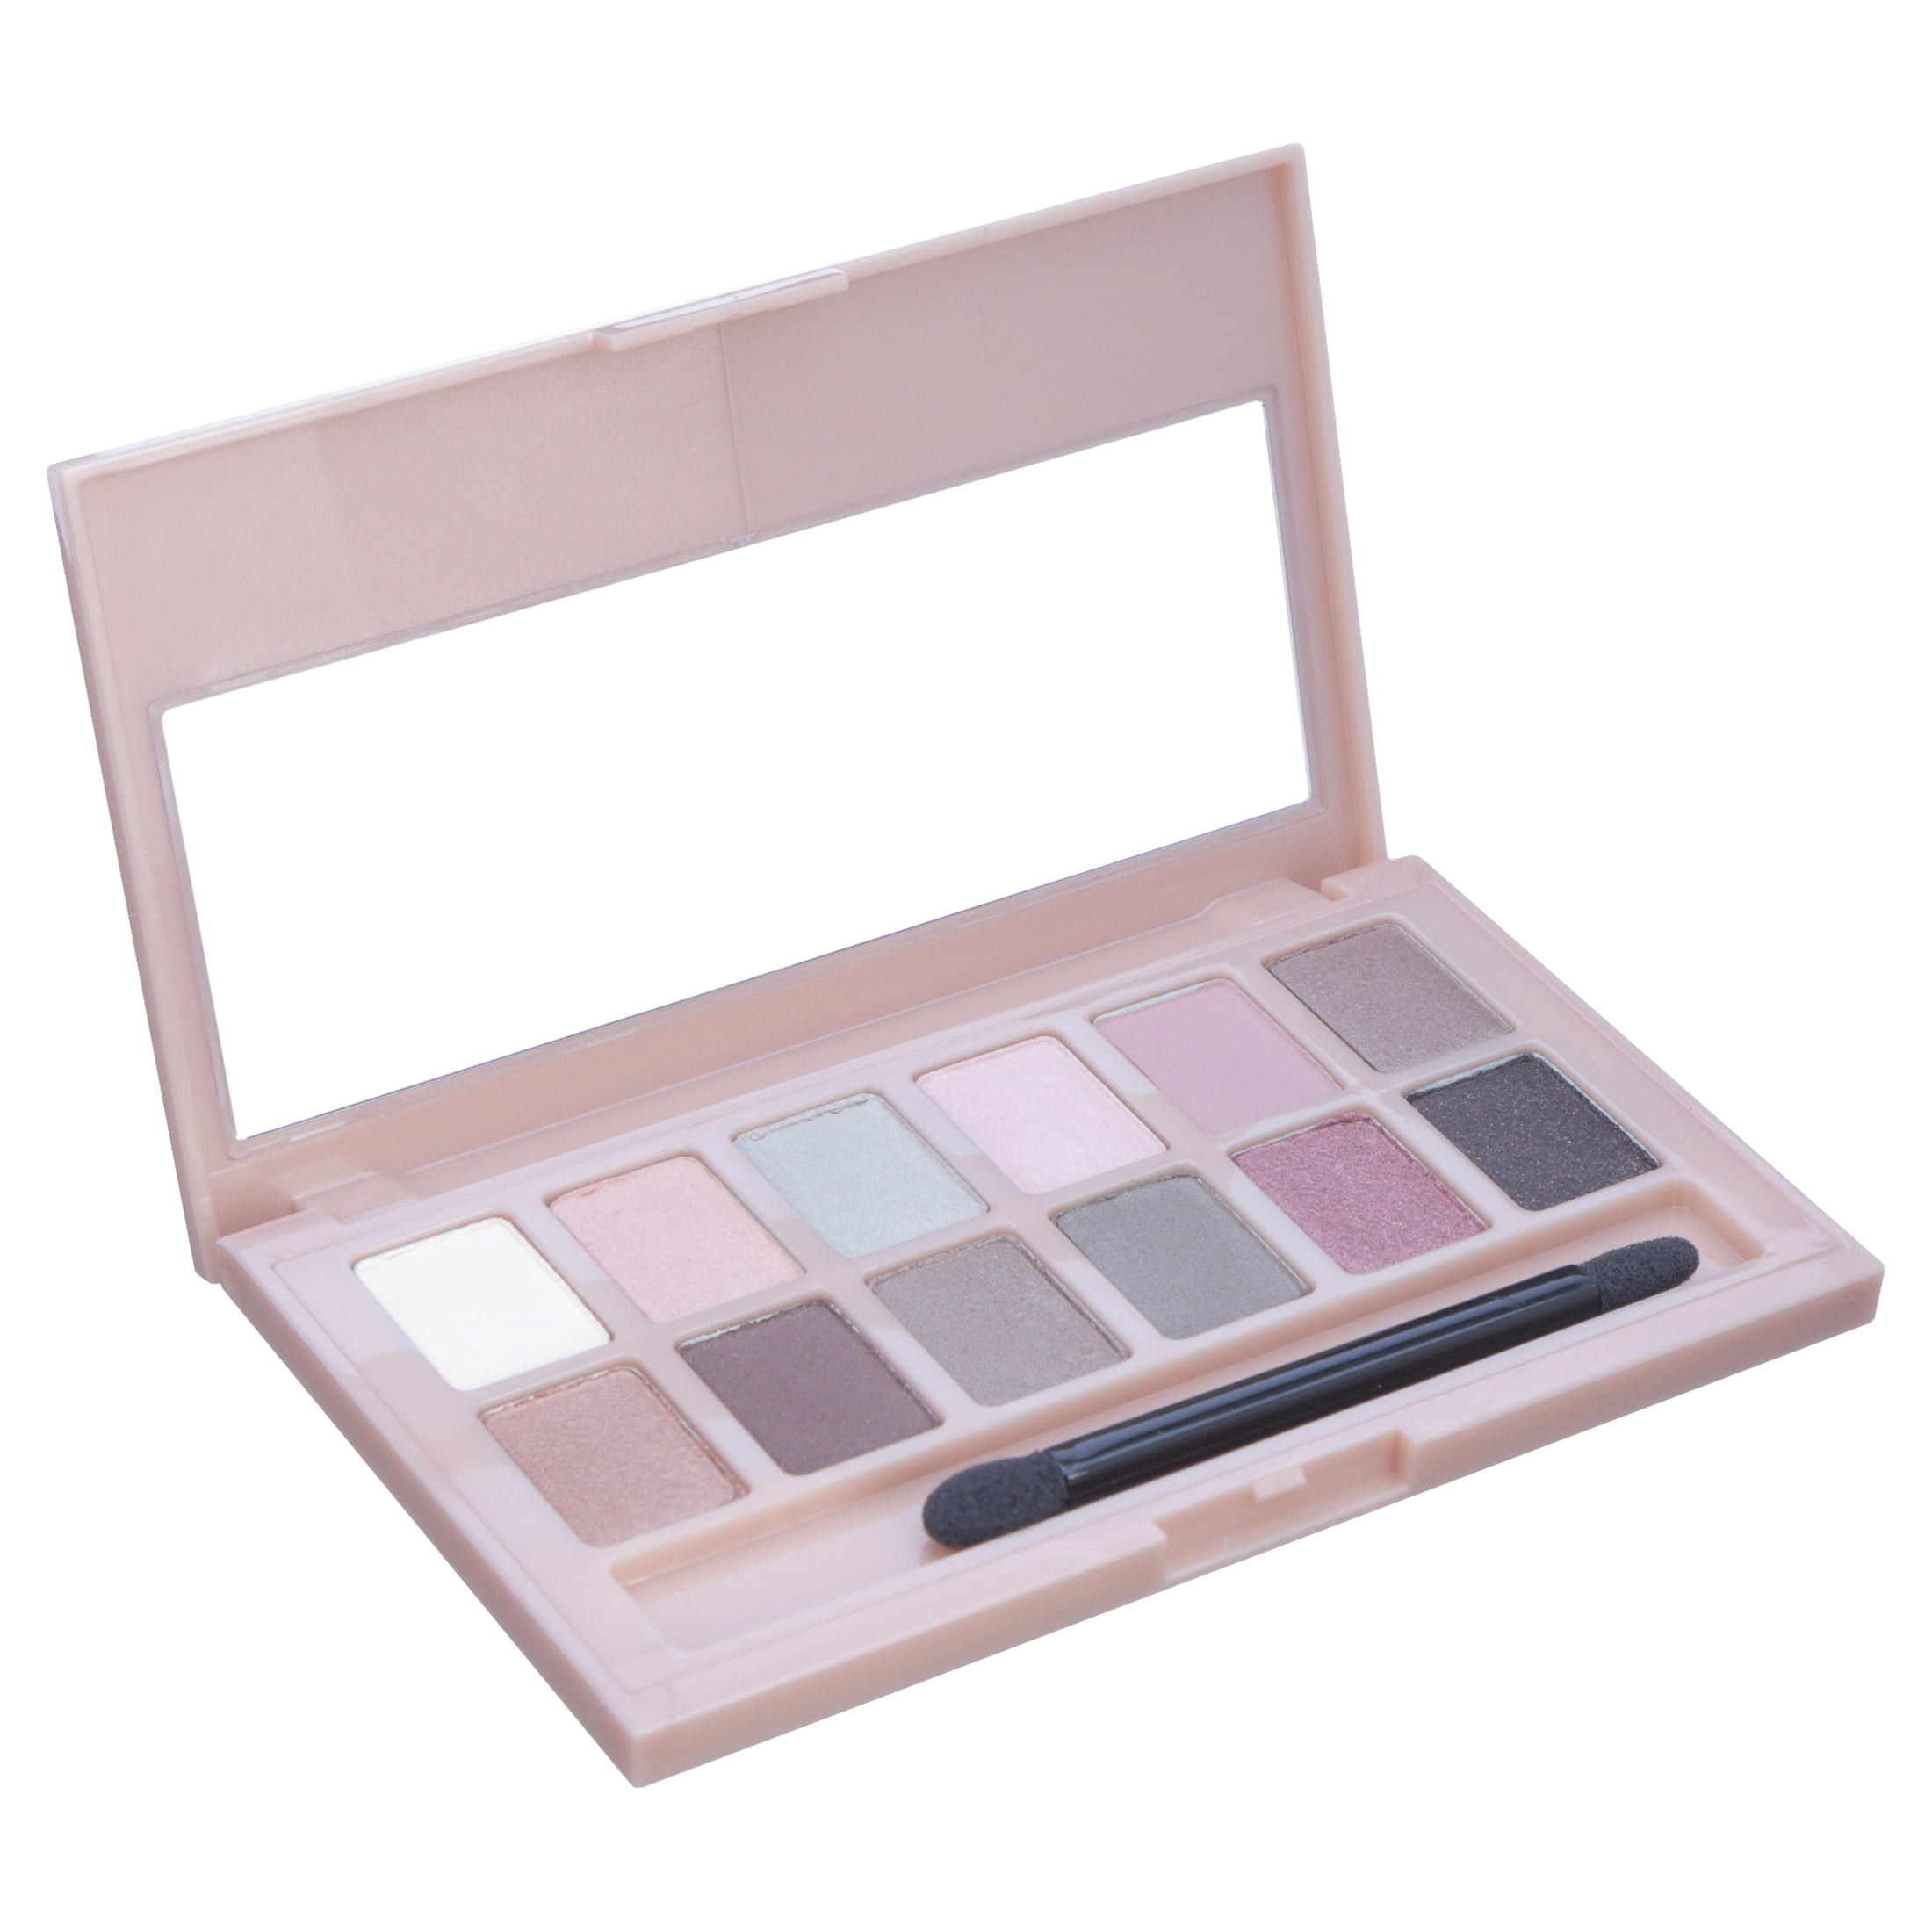 Maybelline The Blushed Eyeshadow Palette Nudes